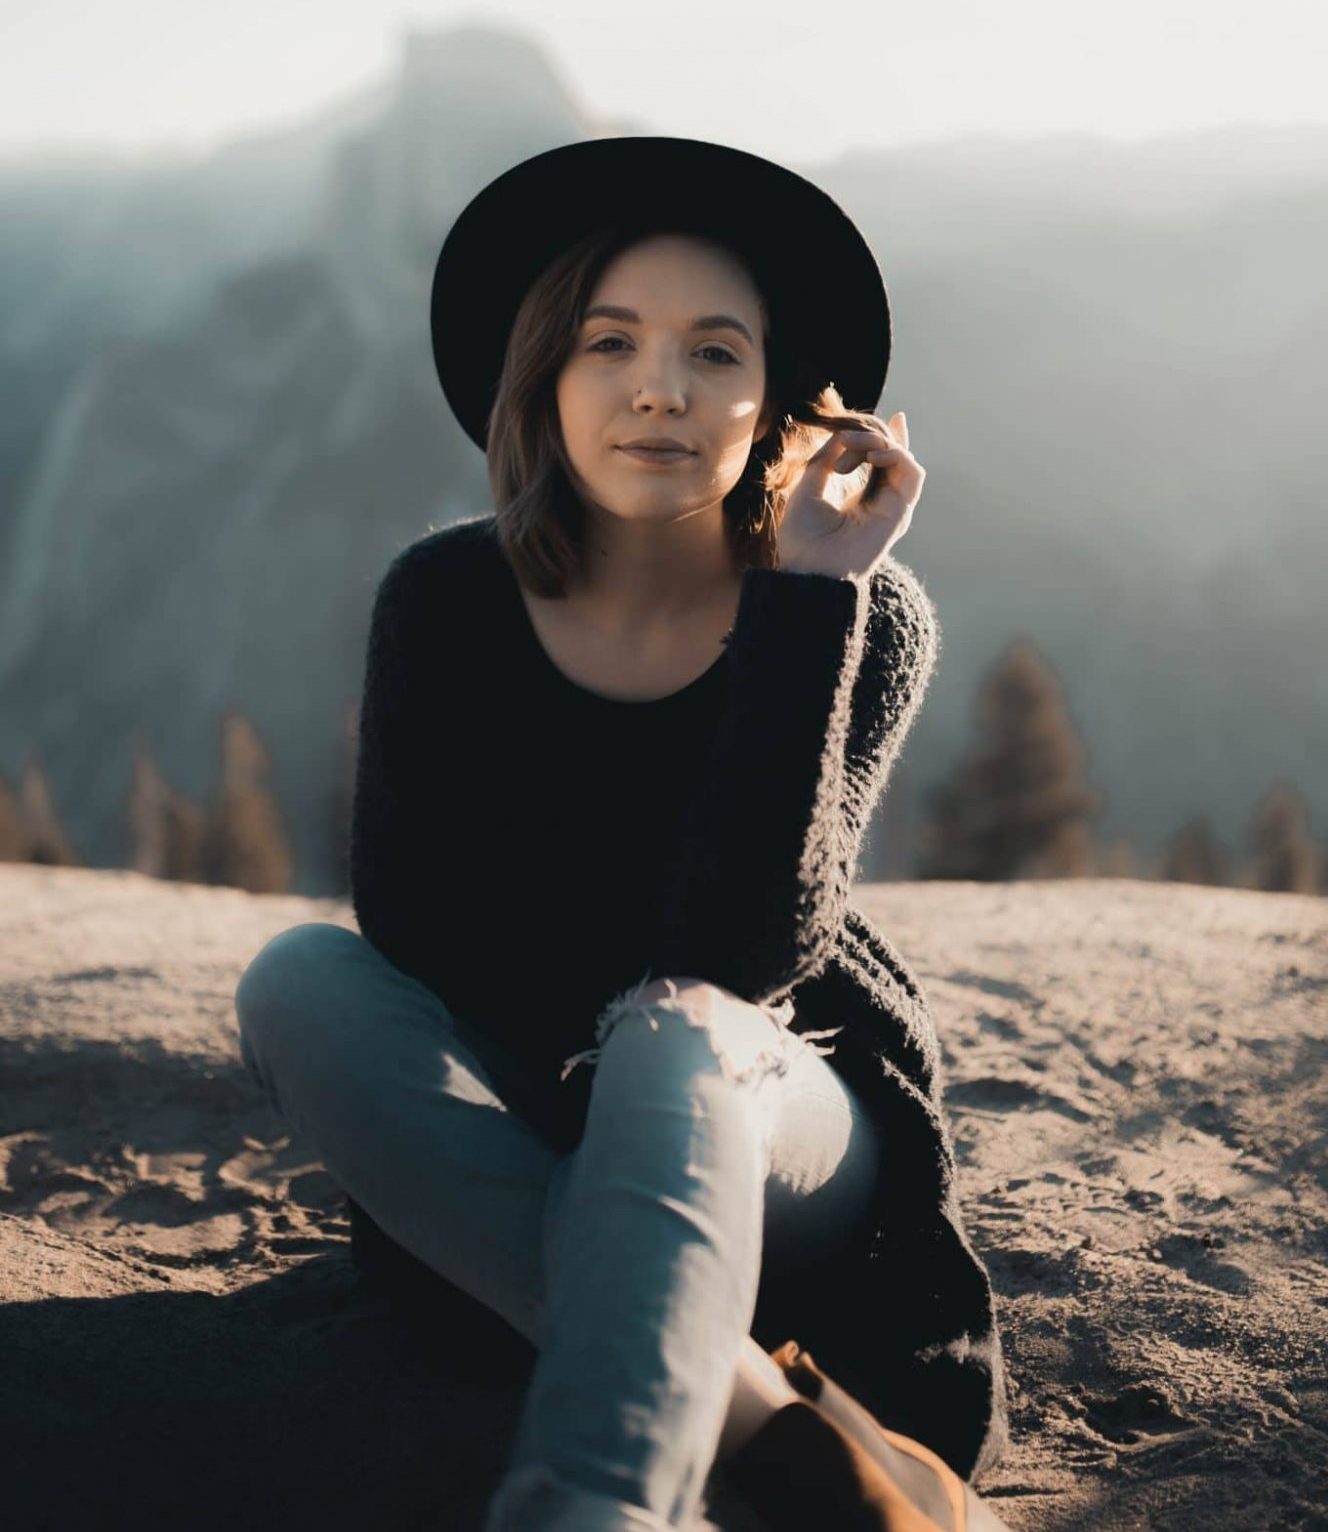 Woman sitting on mountain top wearing a stylish hat in a picturesque environment